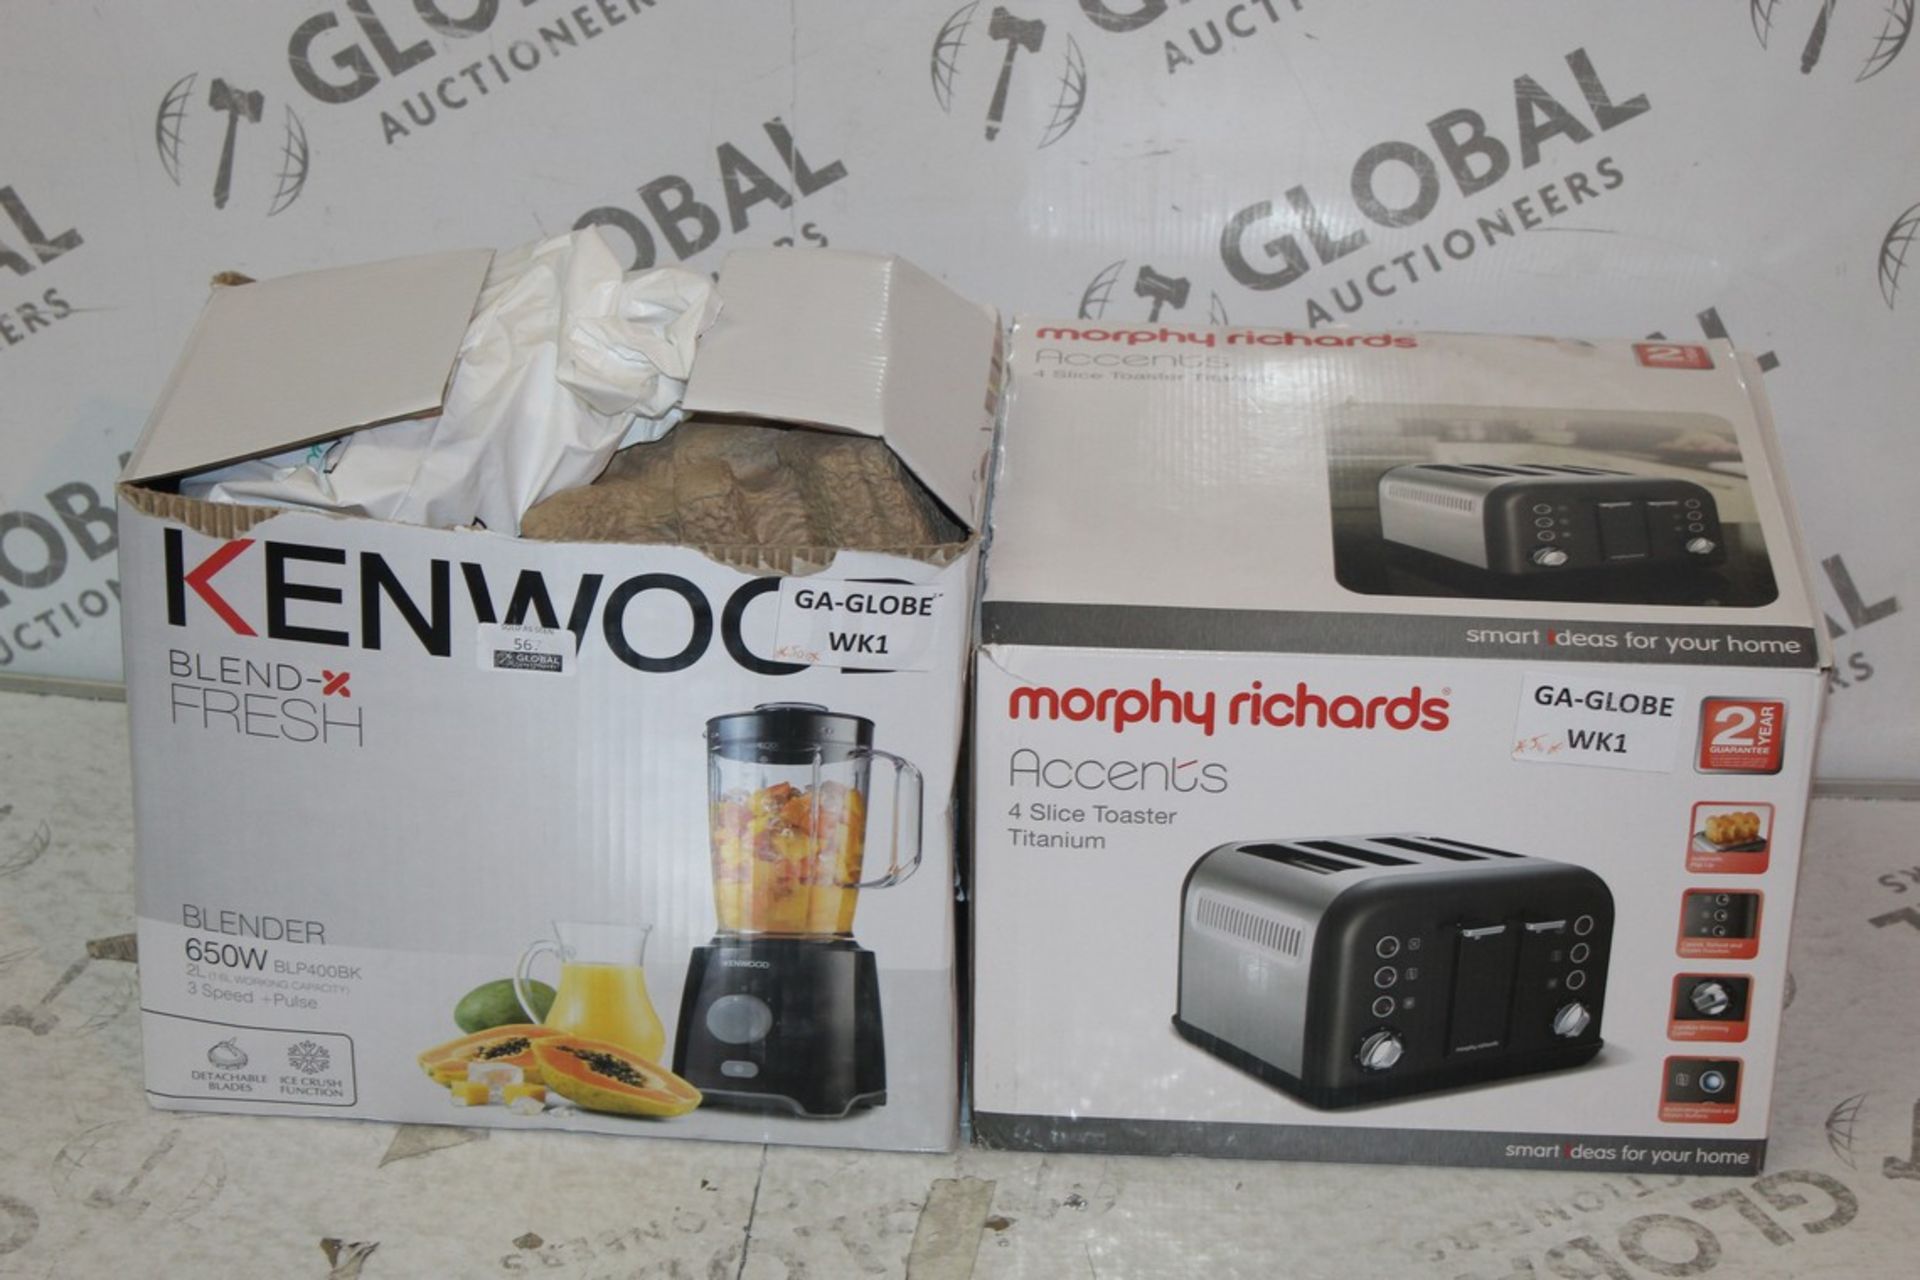 Boxed Assorted Items To Include A Kenwood Blender And Morphy Richards Accents 4 Slice Toaster RRP £